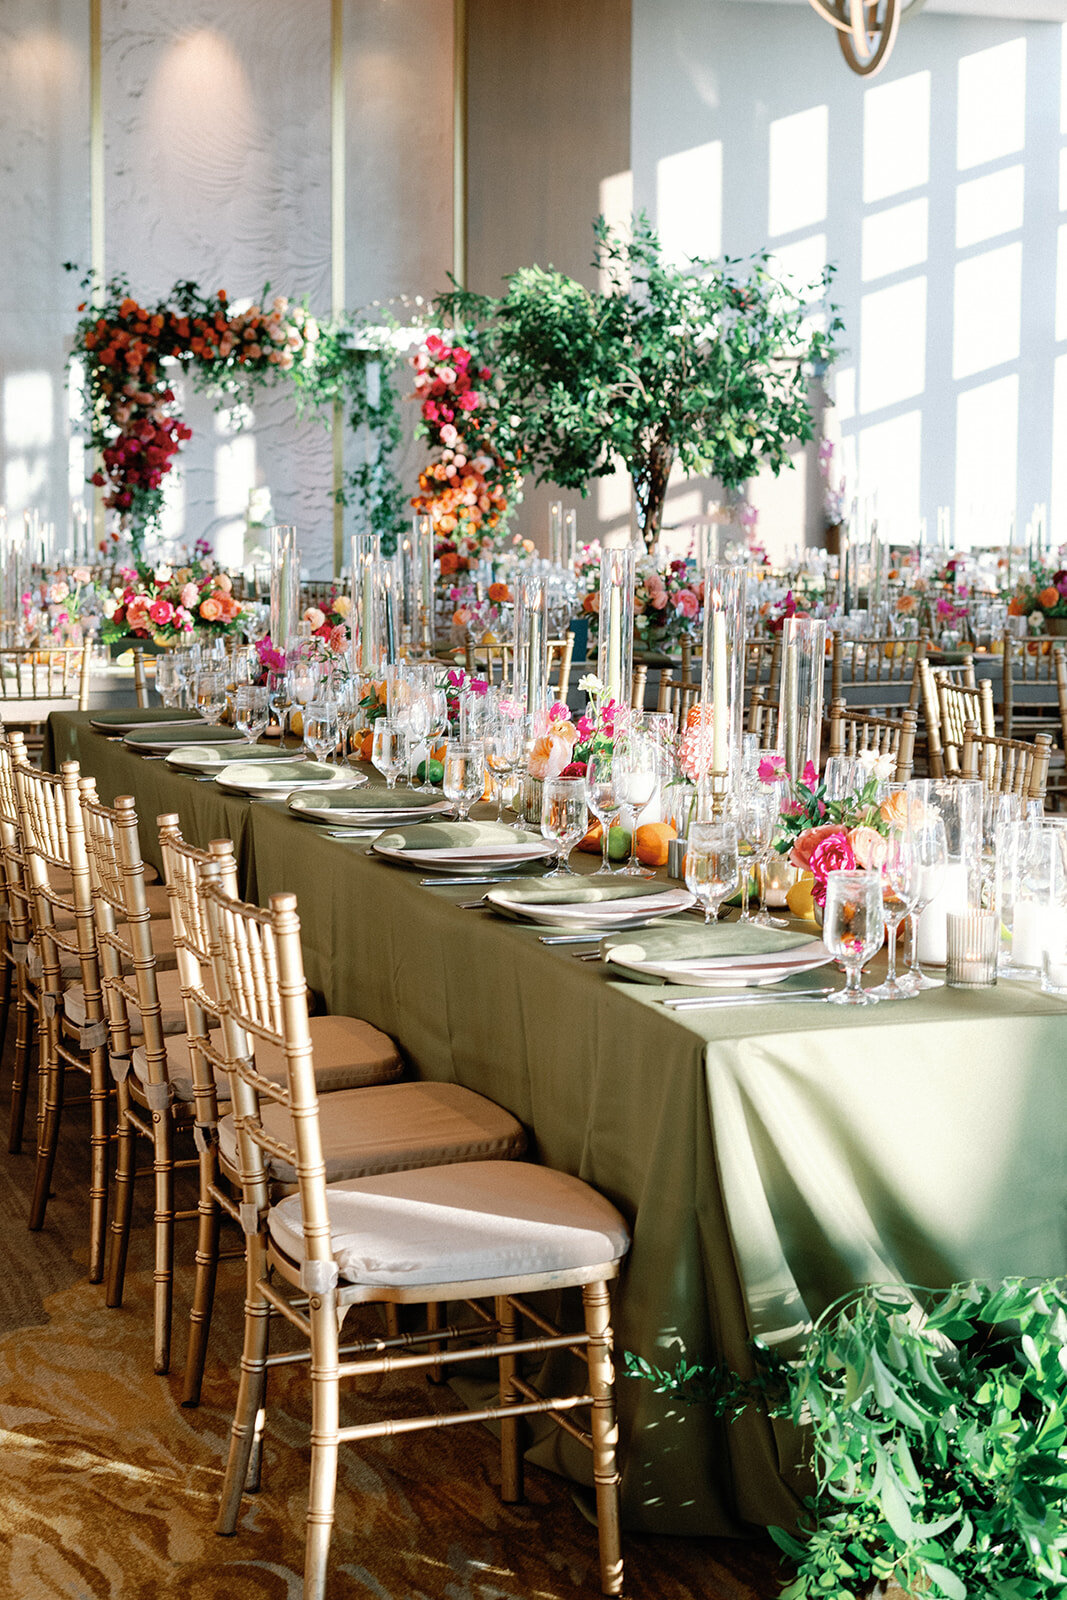 Elegant wedding reception with colorful floral centerpieces